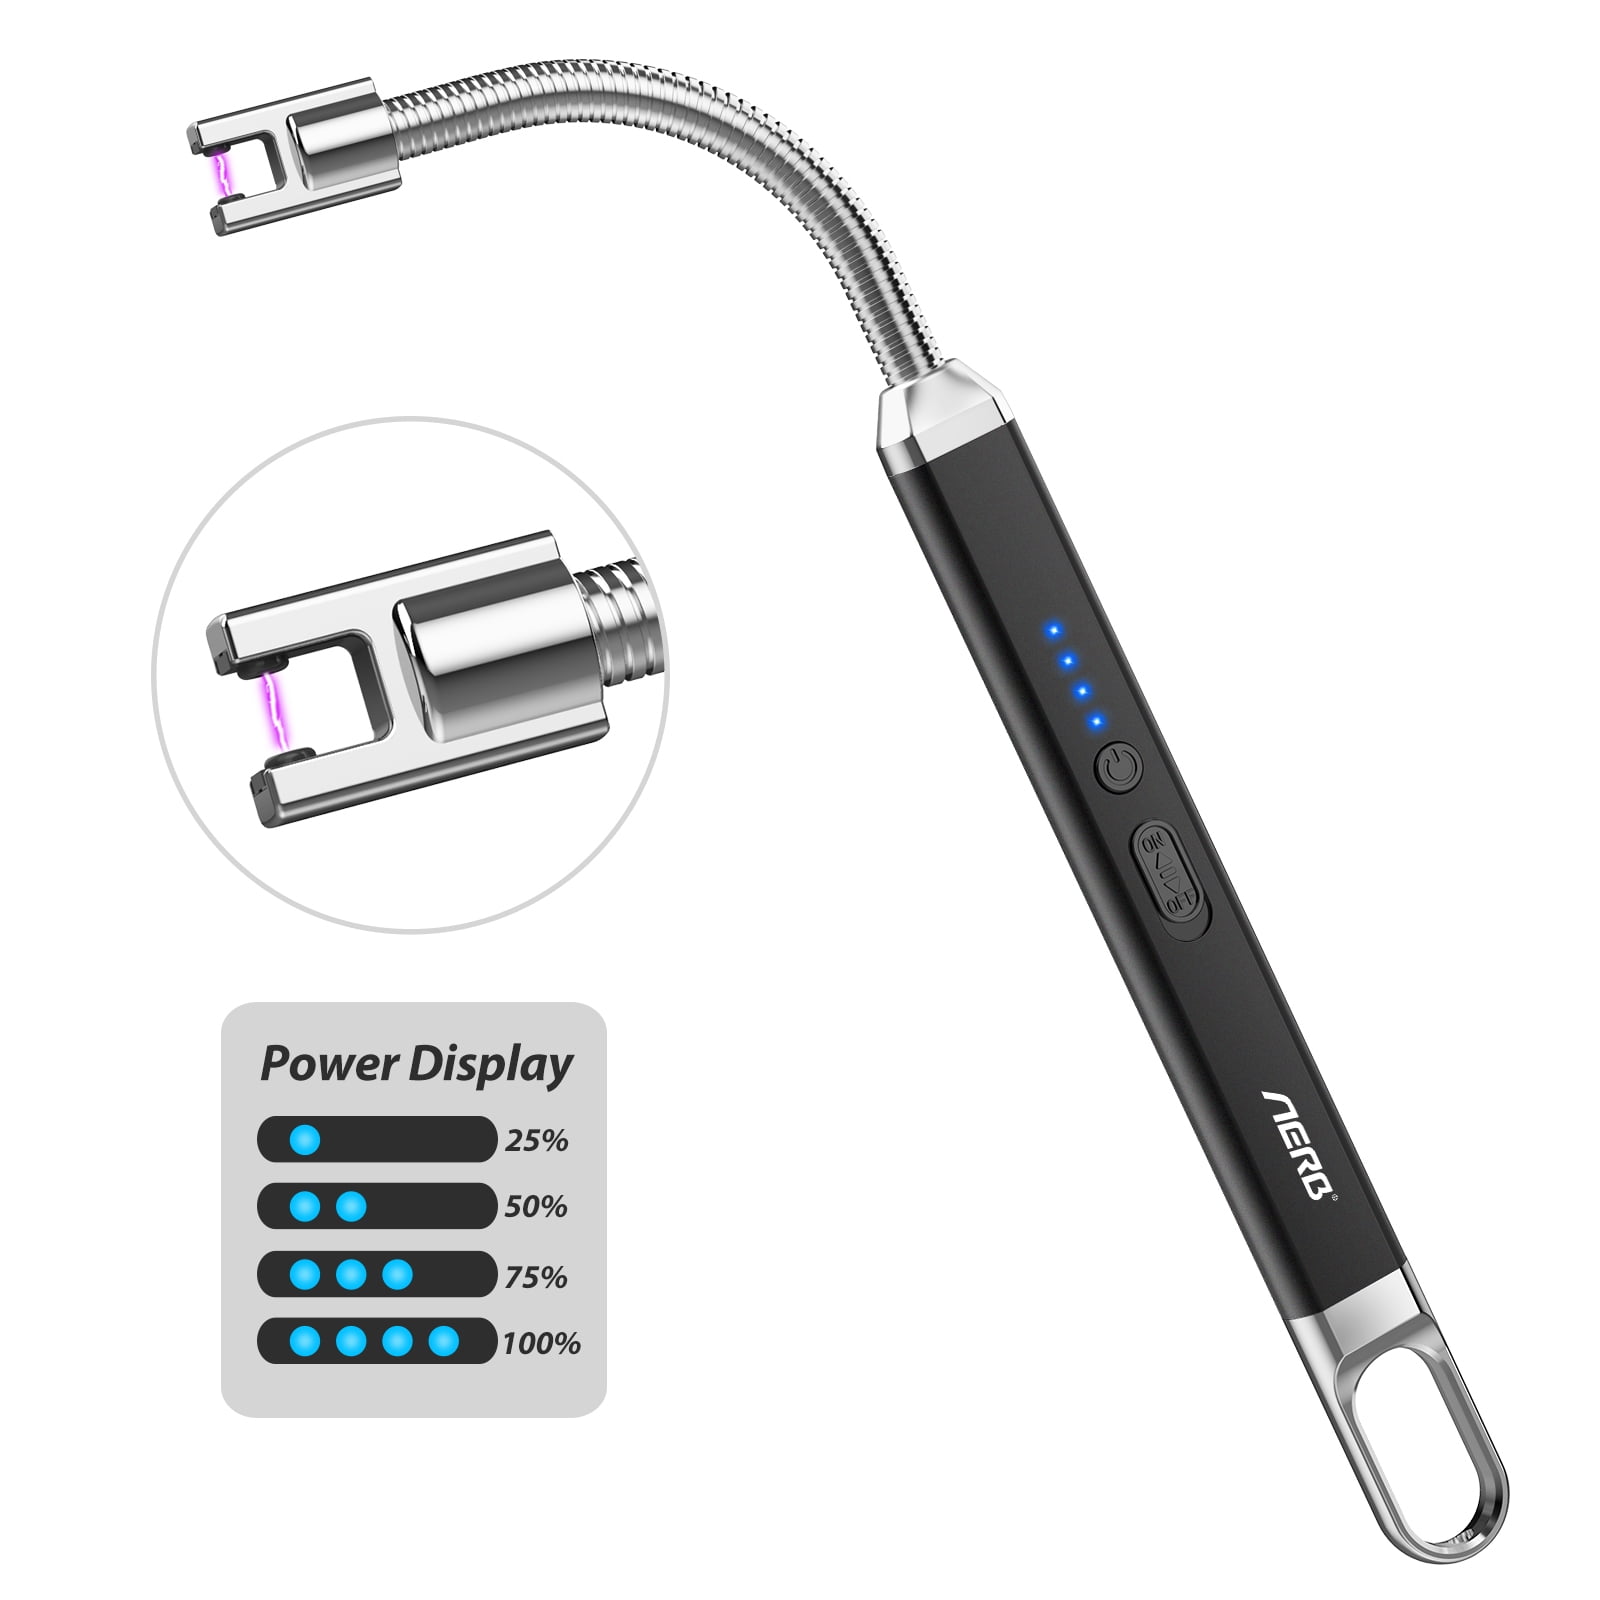 LED Display Heat Dual Arc Arch Rechargeable USB Electric Pulse Plasma Lighter 